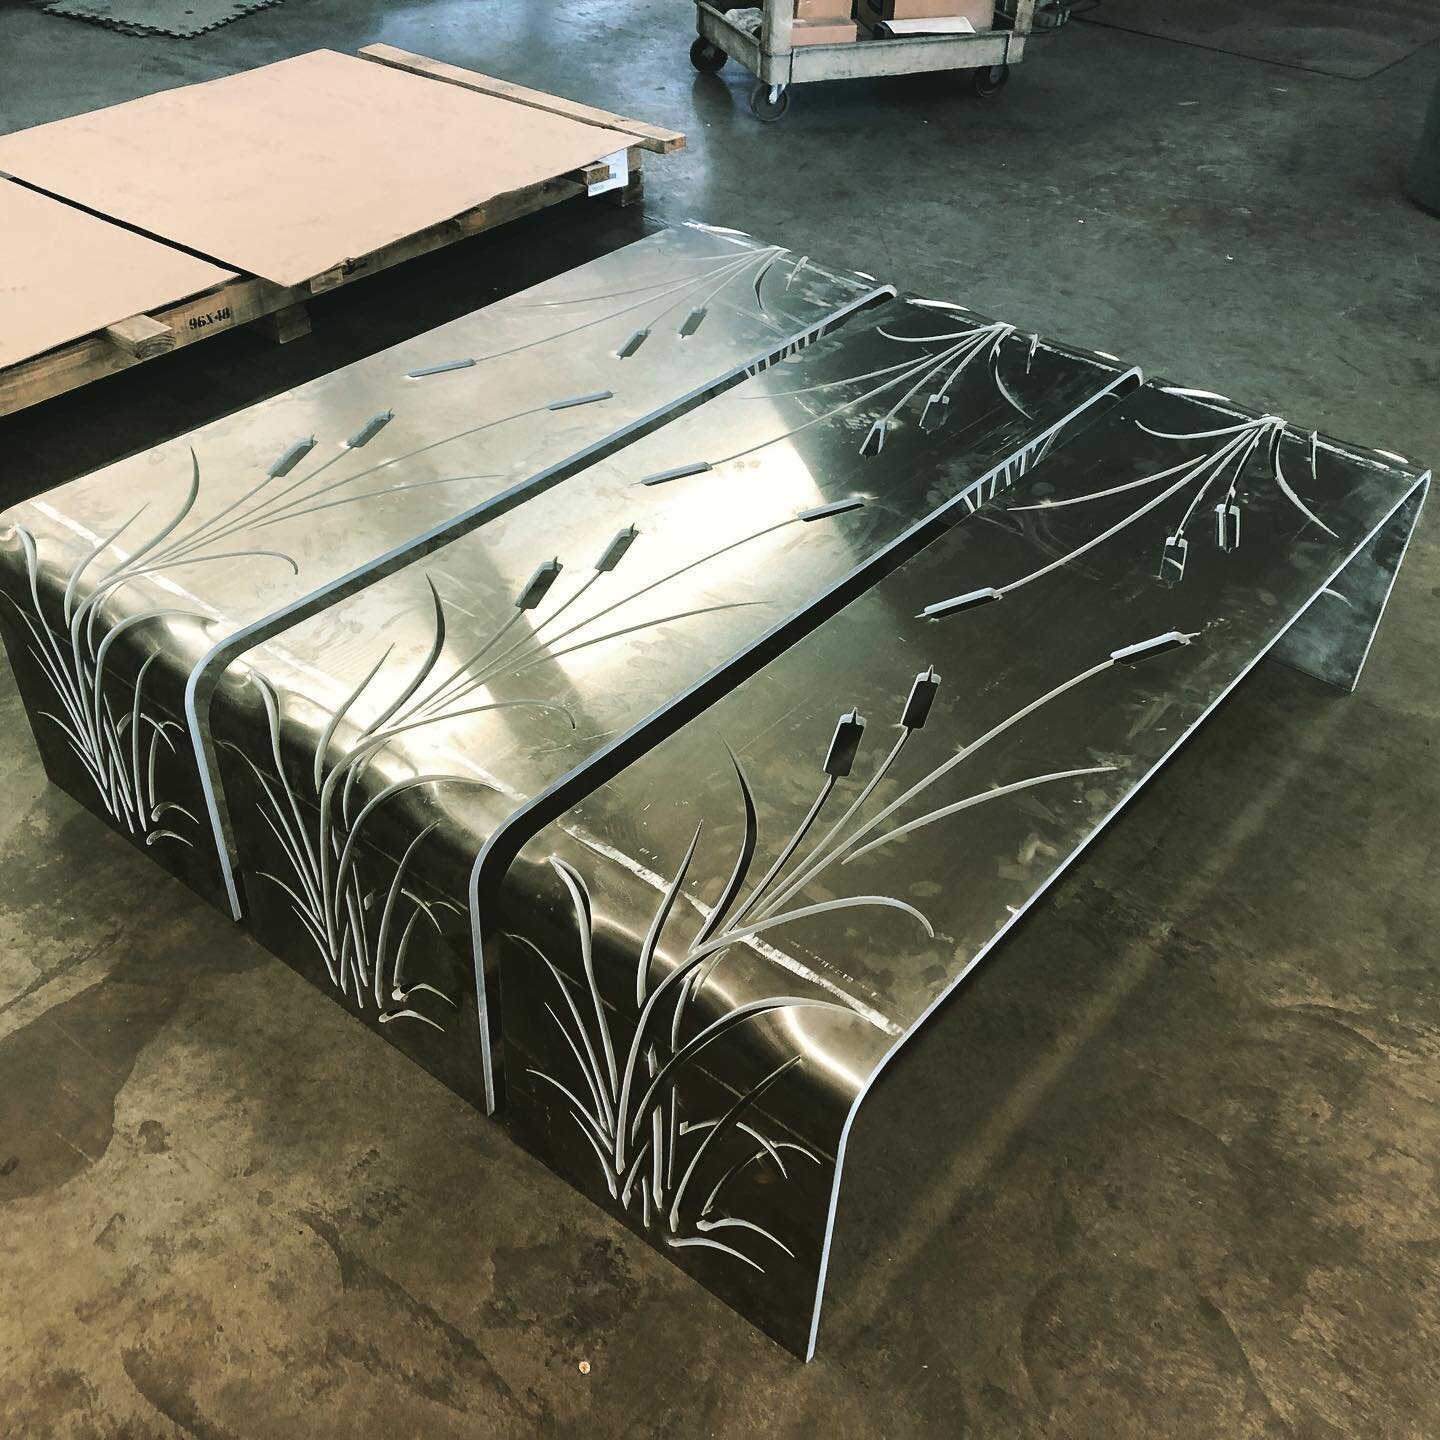 Just a couple Badass Benches.
1/2&rdquo; aluminum, waterjet cut and formed.
#custommade #benchesofinstagram #nature #landscaping